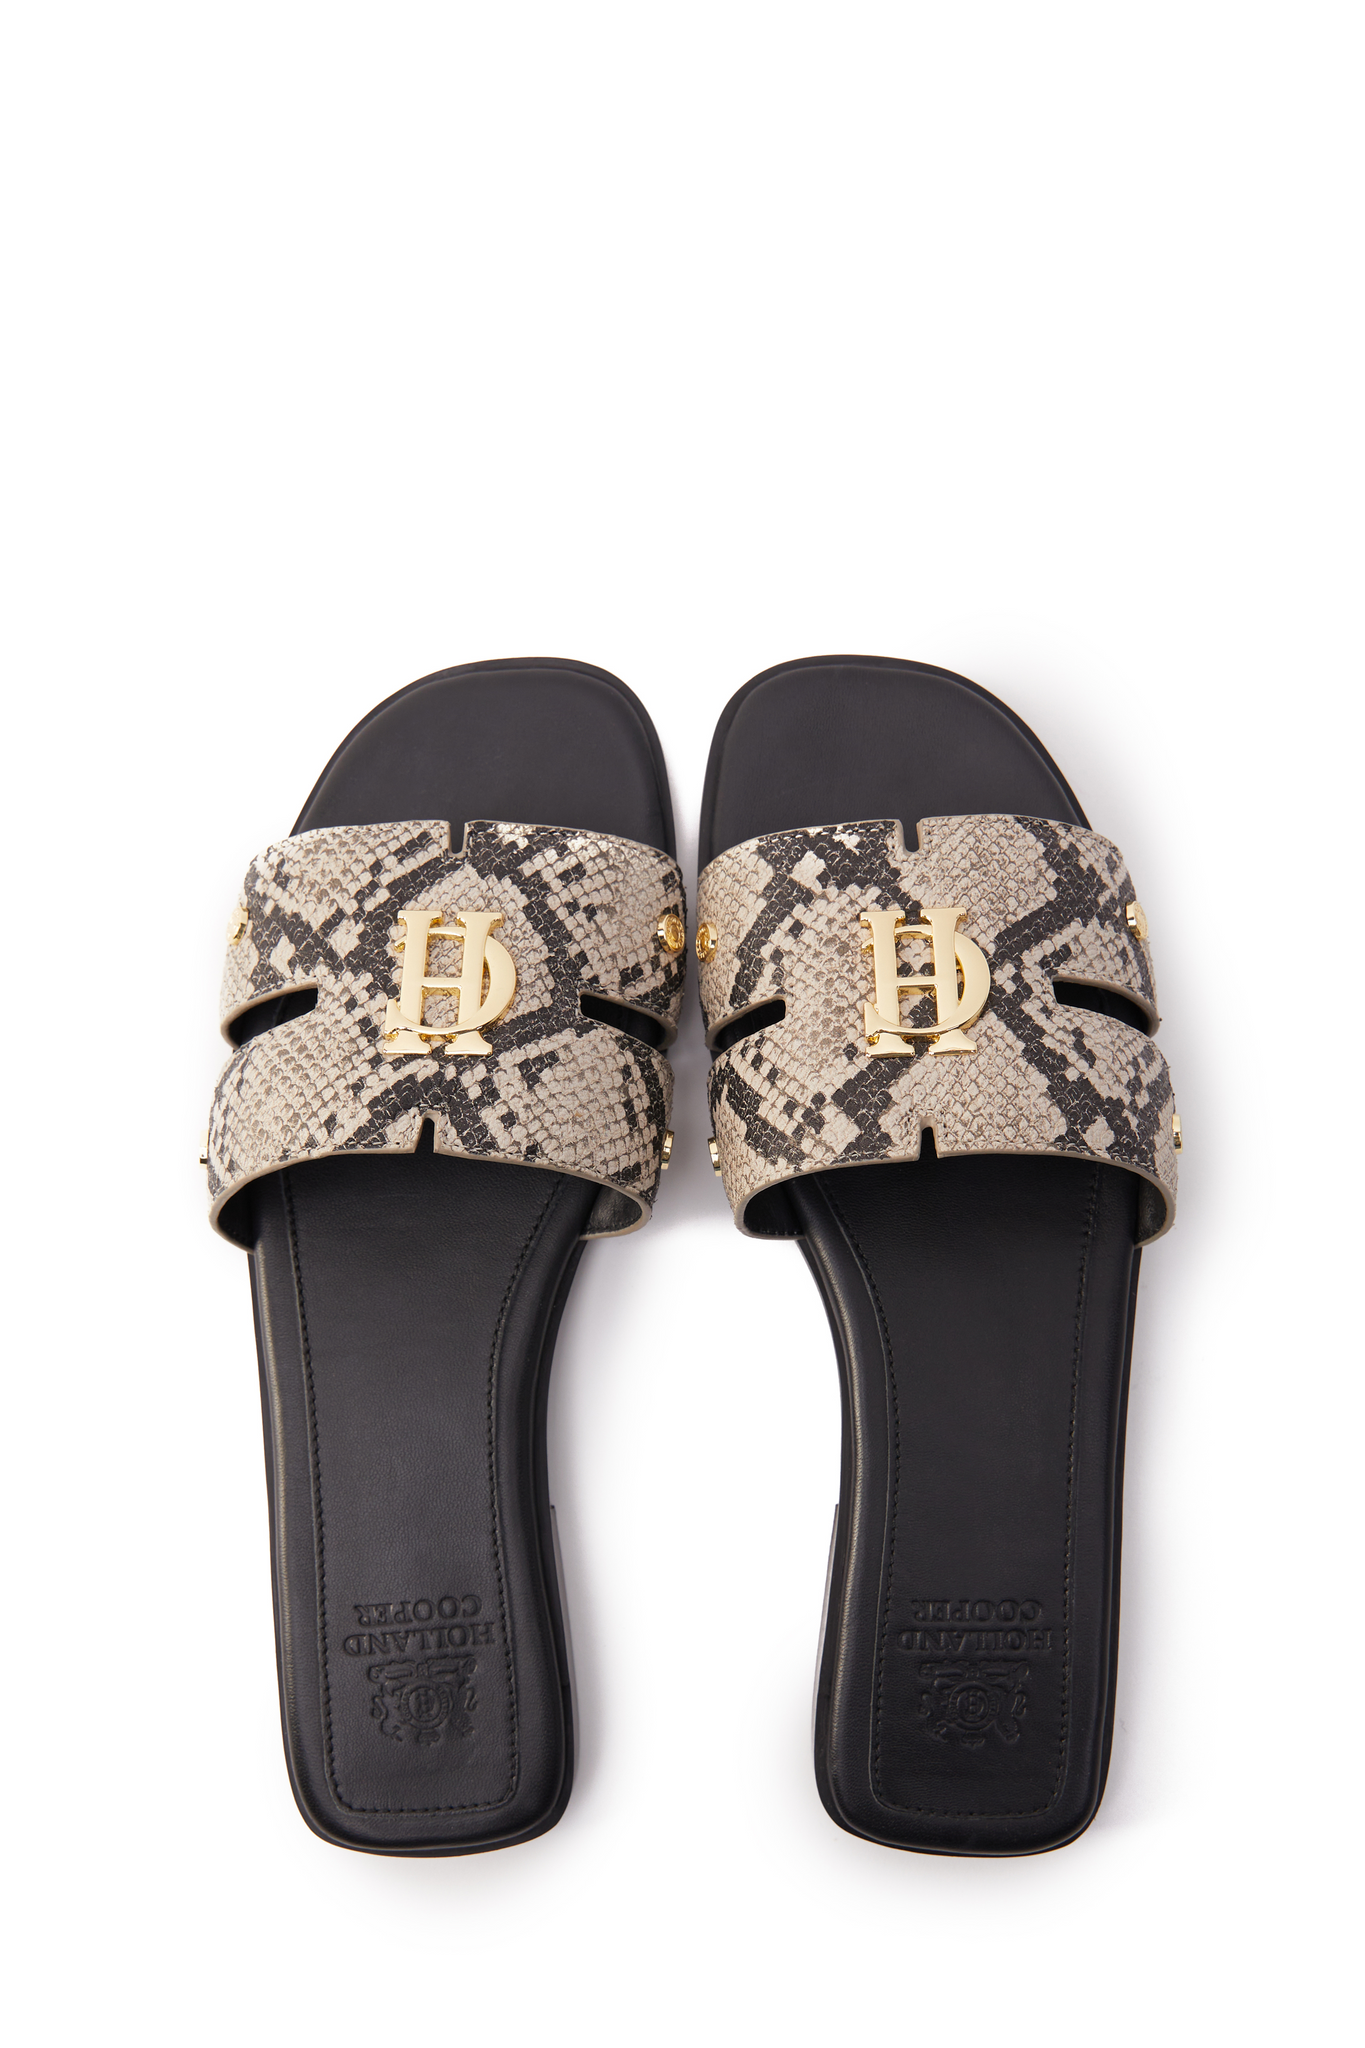 Birds eye view of snake print embossed leather sliders with a black leather sole and gold hardware